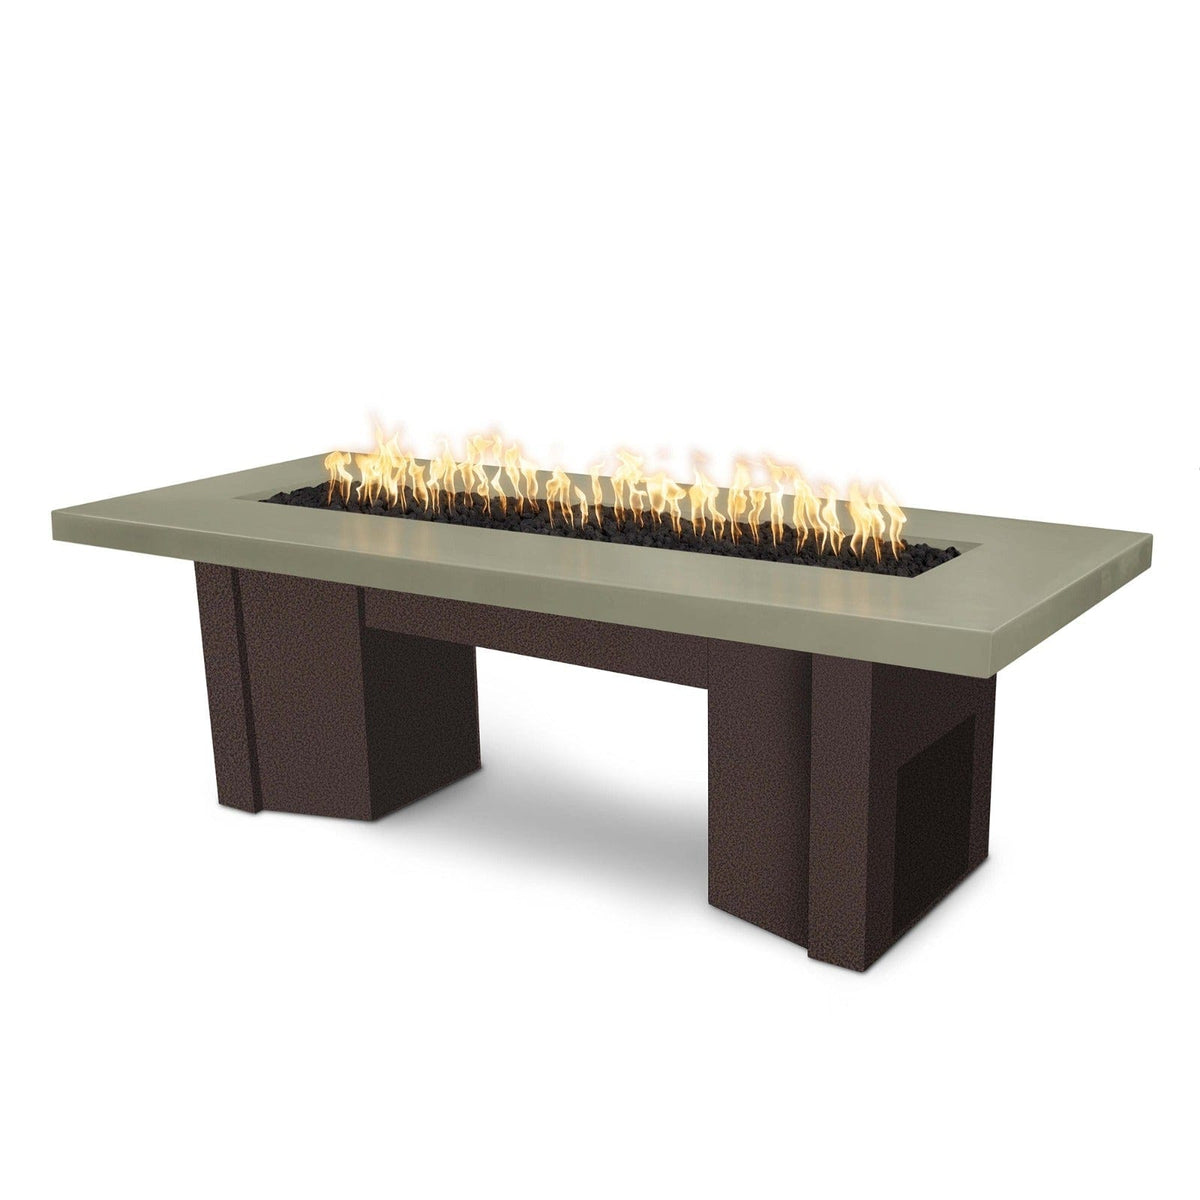 The Outdoor Plus Fire Features Ash (-ASH) / Copper Vein Powder Coated Steel (-CPV) The Outdoor Plus 60&quot; Alameda Fire Table Smooth Concrete in Natural Gas - Match Lit with Flame Sense System / OPT-ALMGFRC60FSML-NG